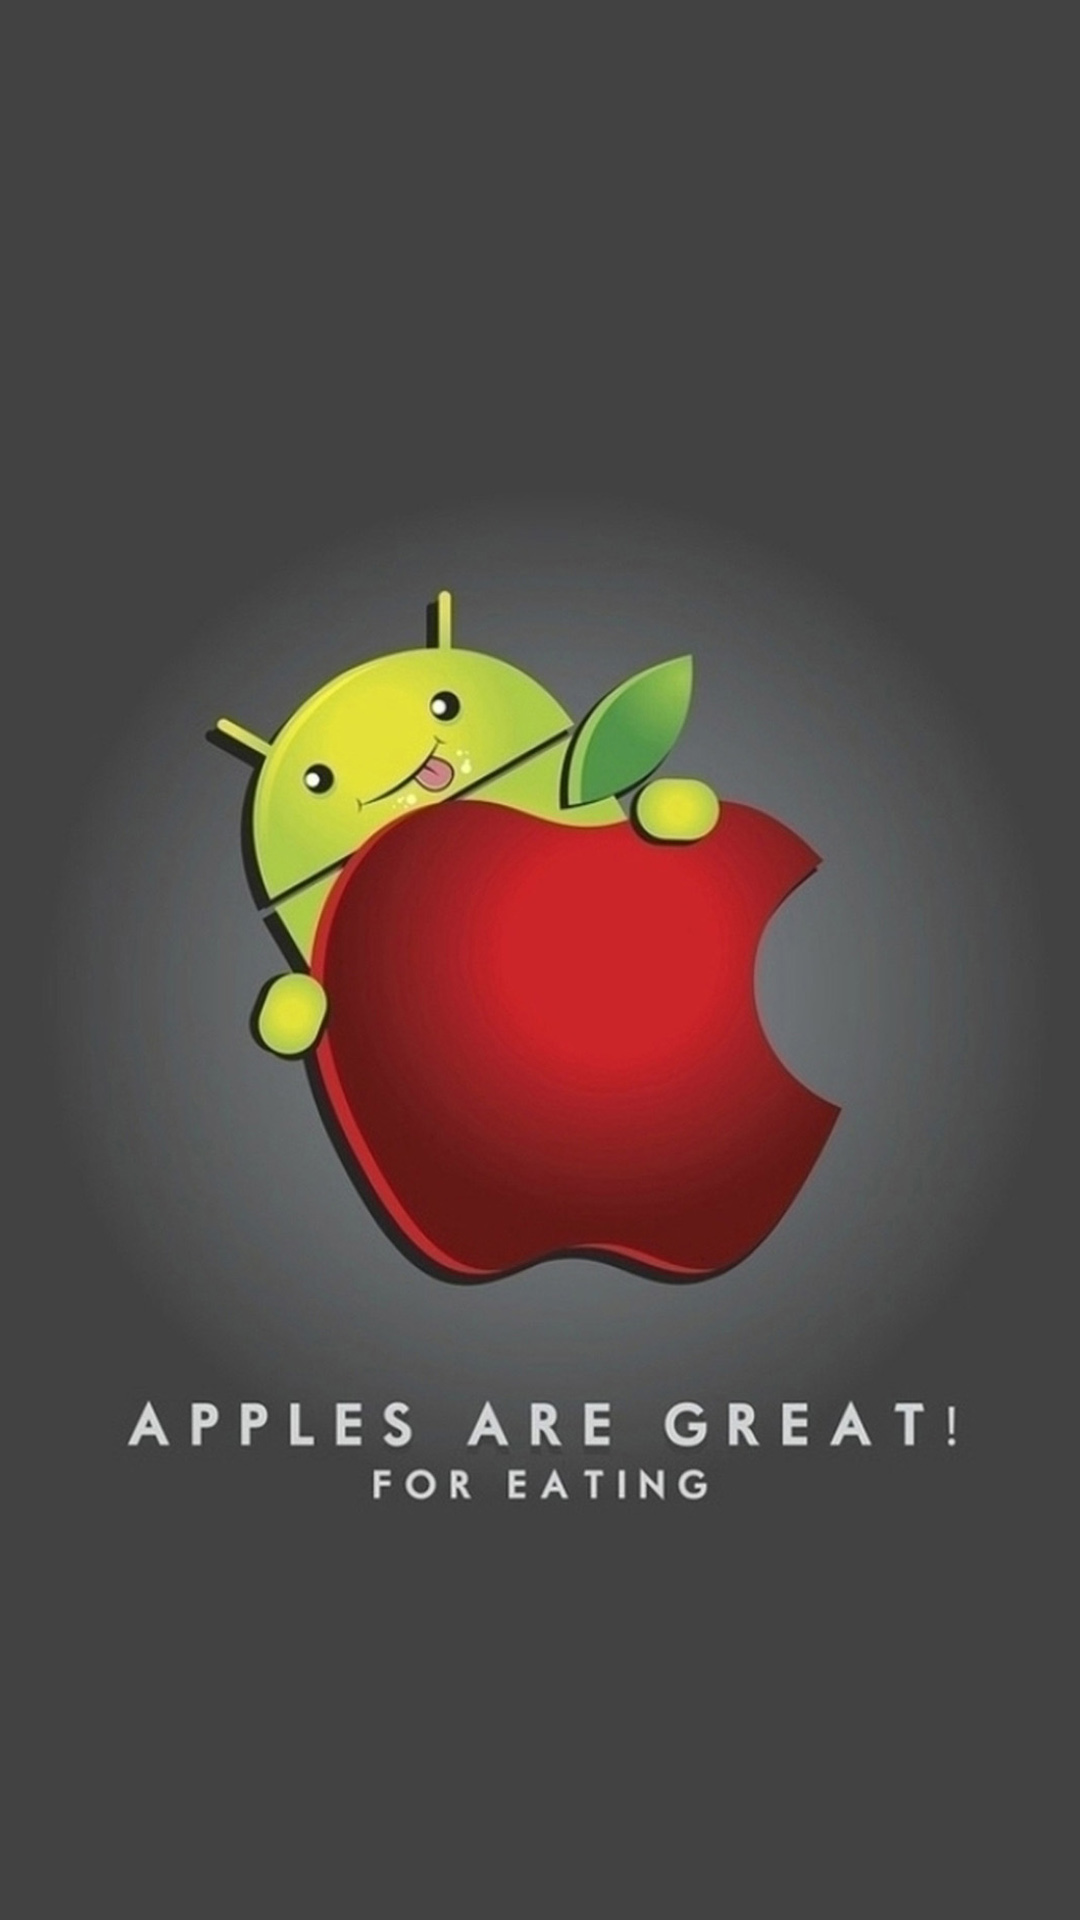 Android Apples Are Great Smartphone Wallpapers Hd - Apple Android - HD Wallpaper 